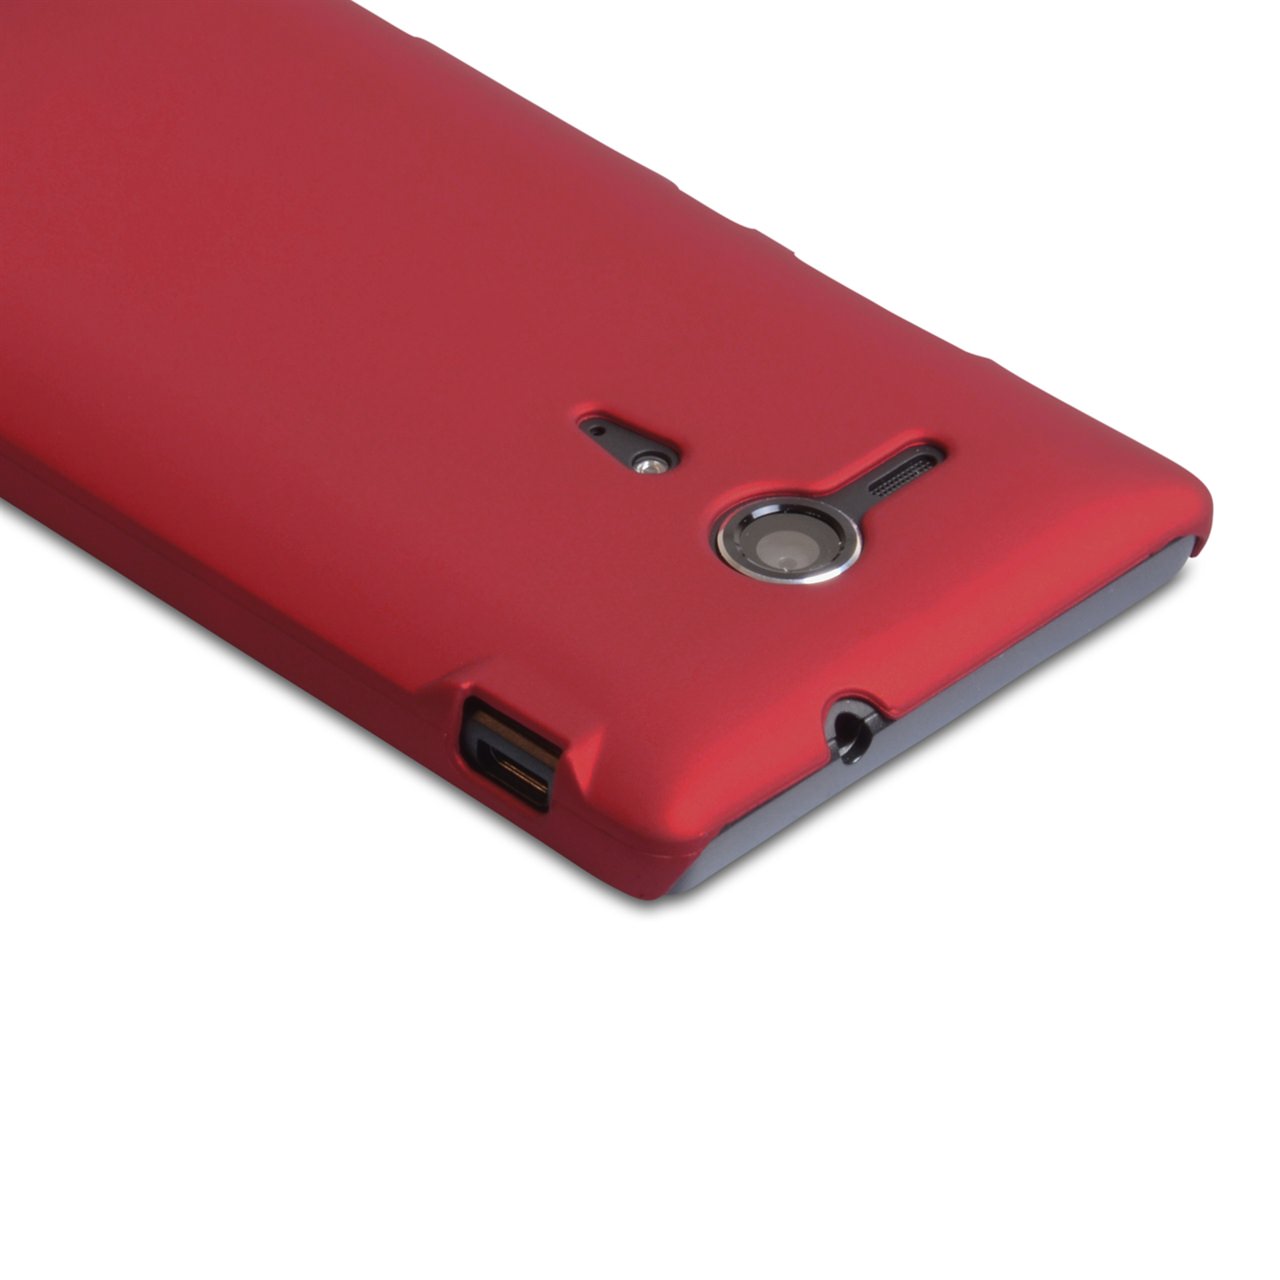 YouSave Accessories Sony Xperia SP Hard Hybrid Case - Red